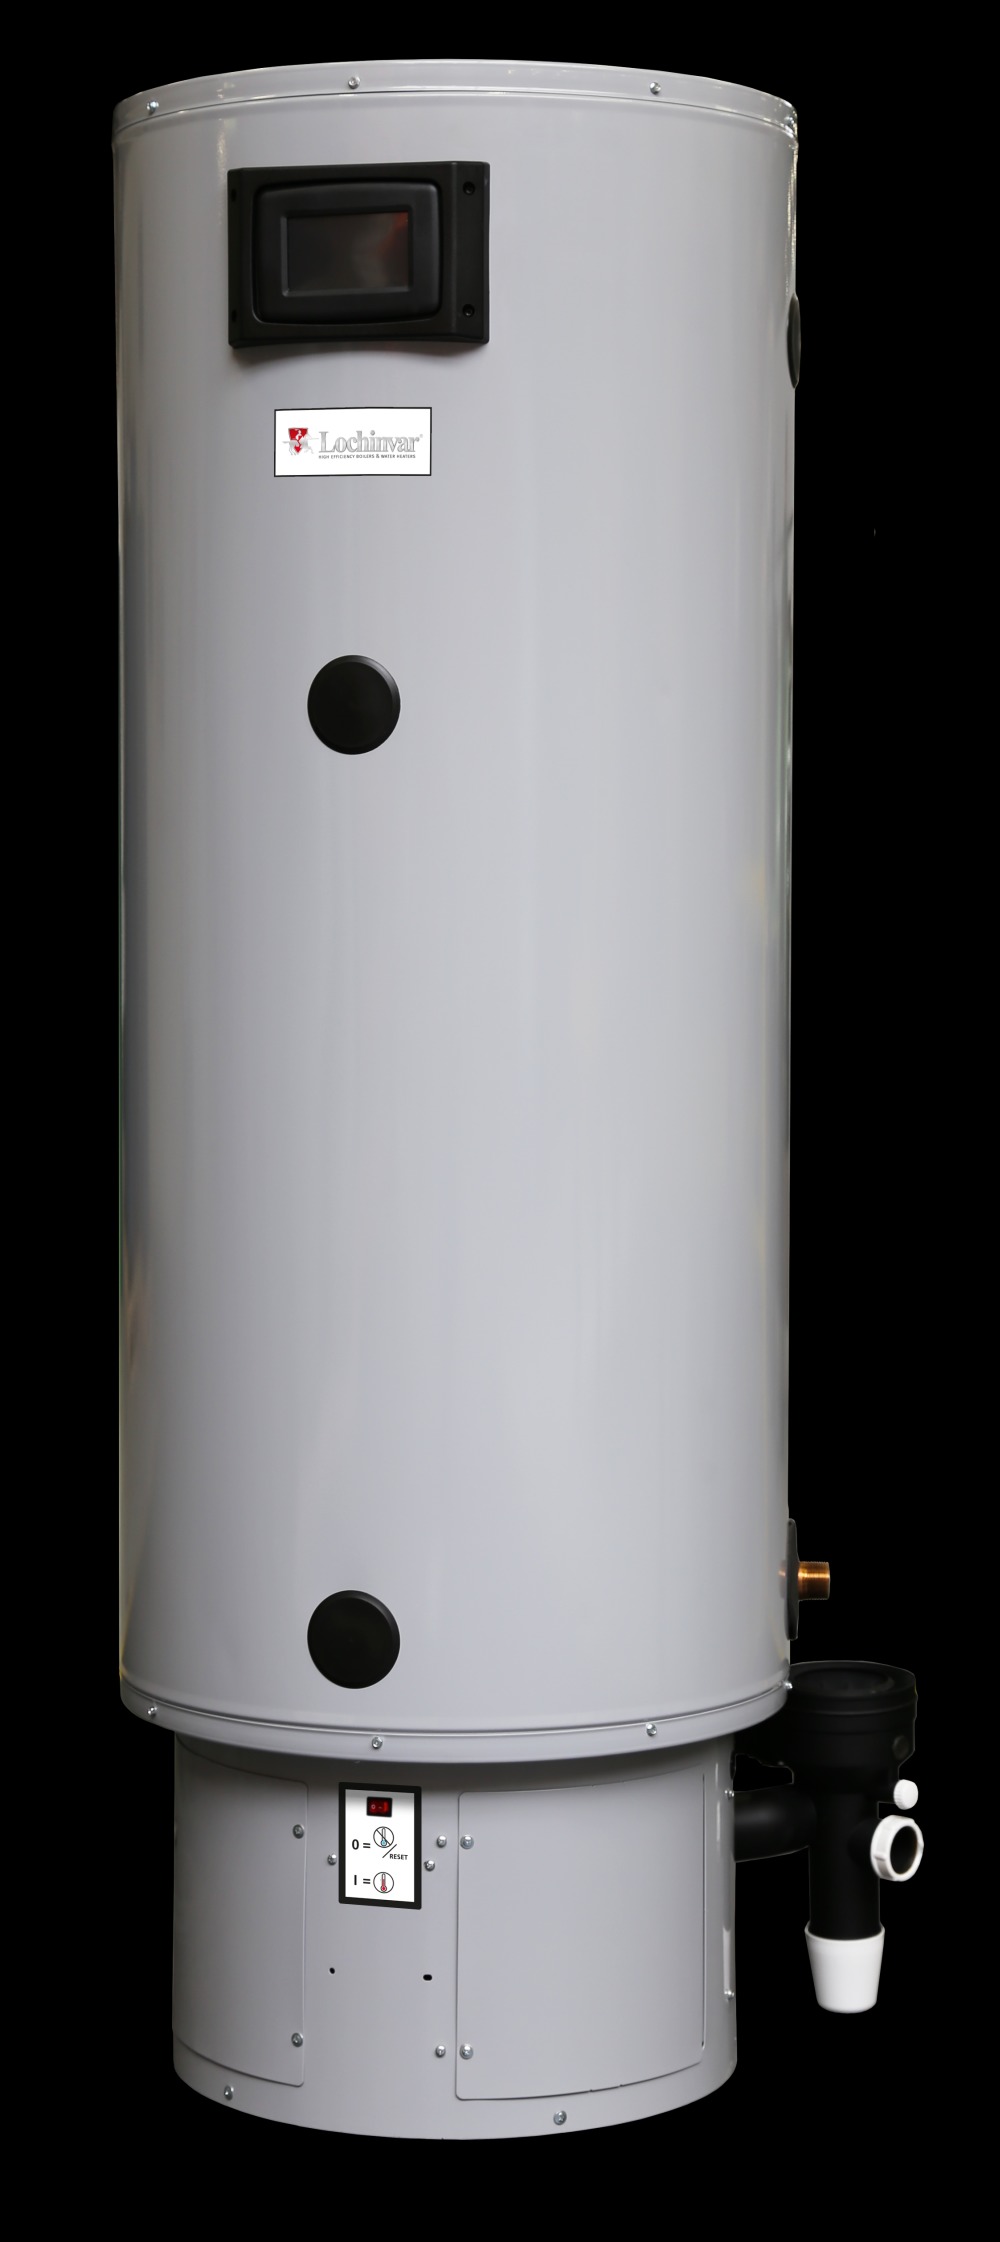 Lochinvar launches stainless steel storage water heaters